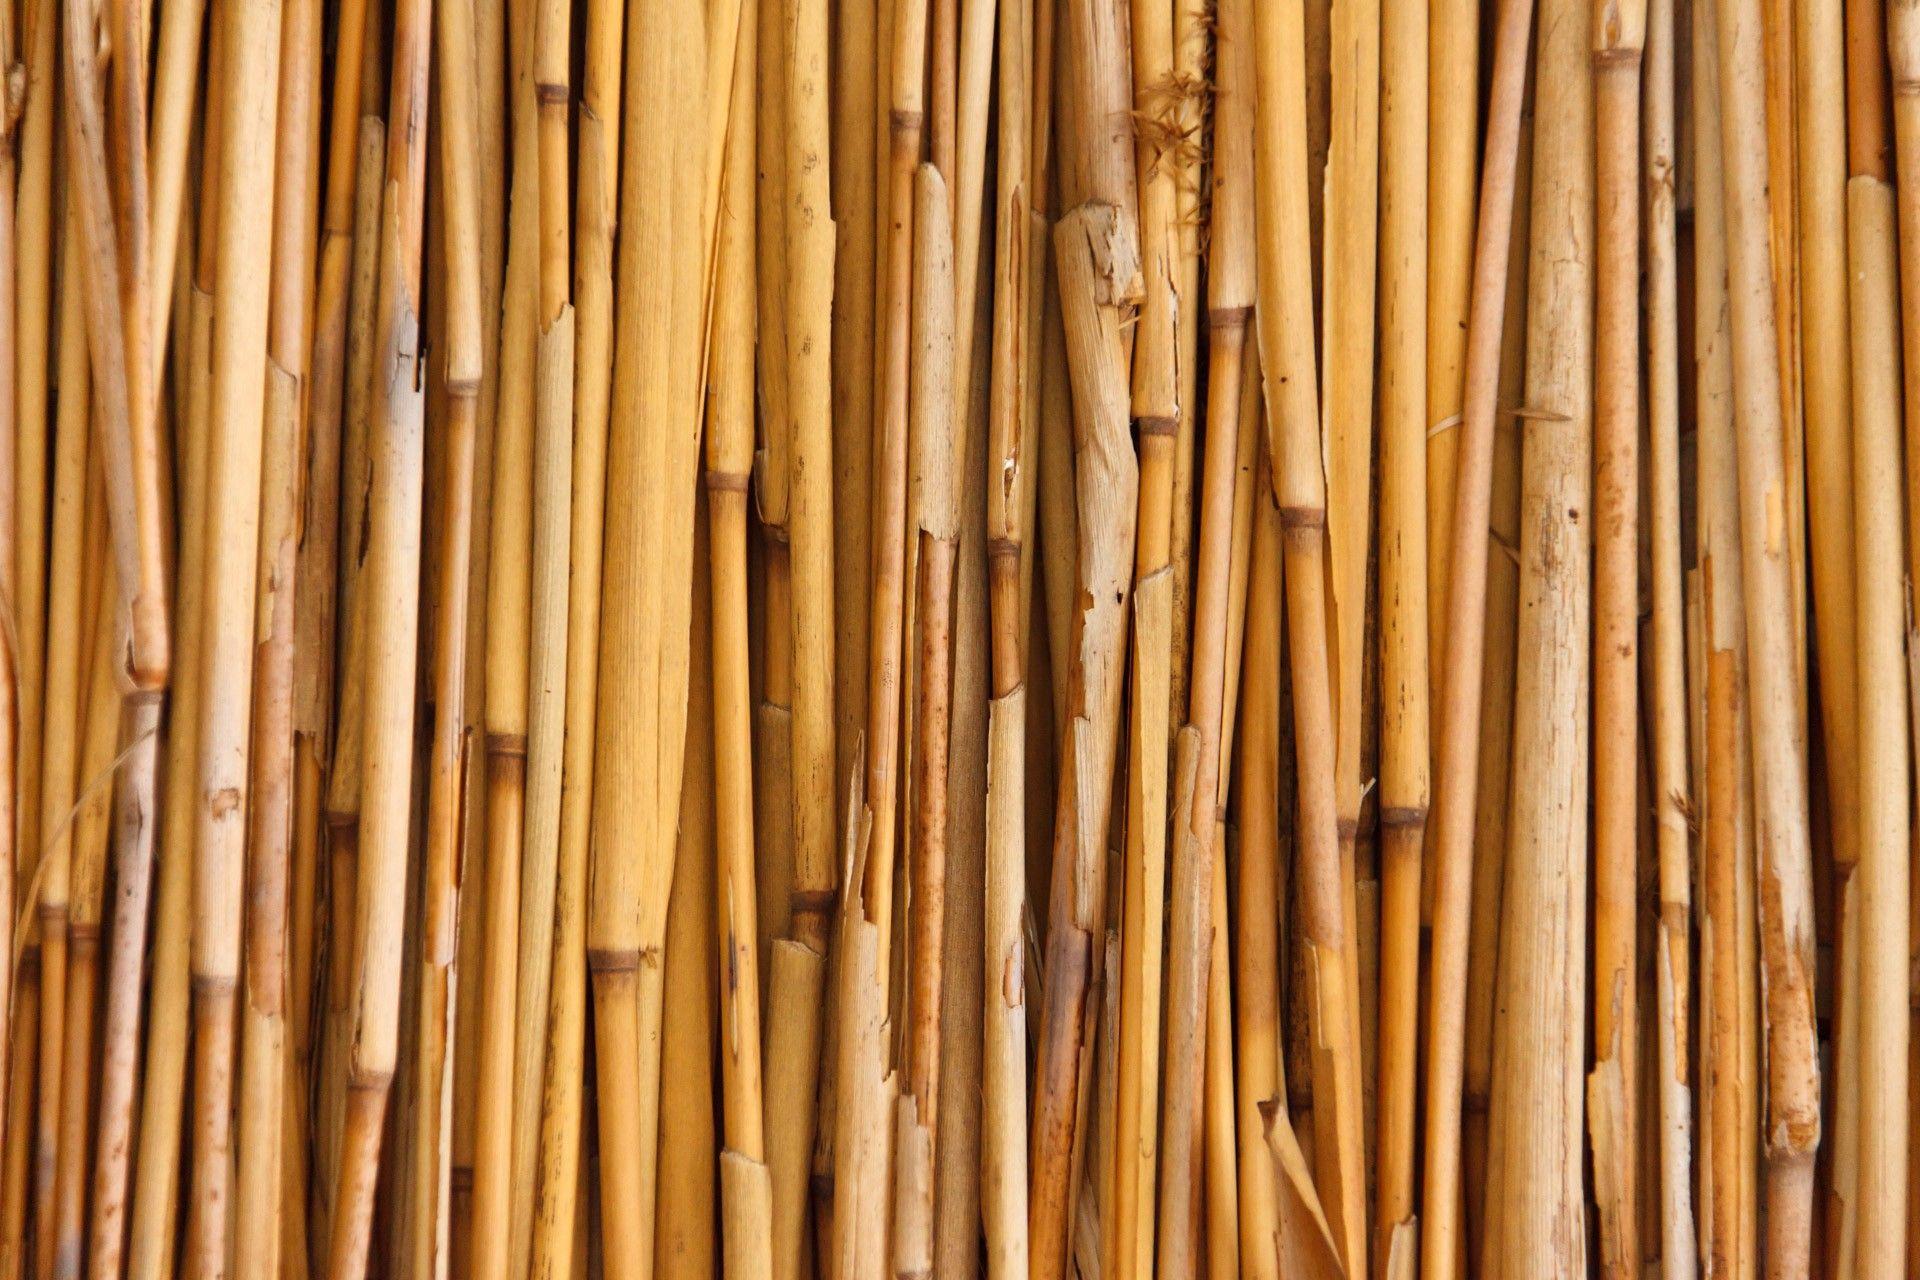 Bamboo backgroundDownload free awesome full HD wallpaper